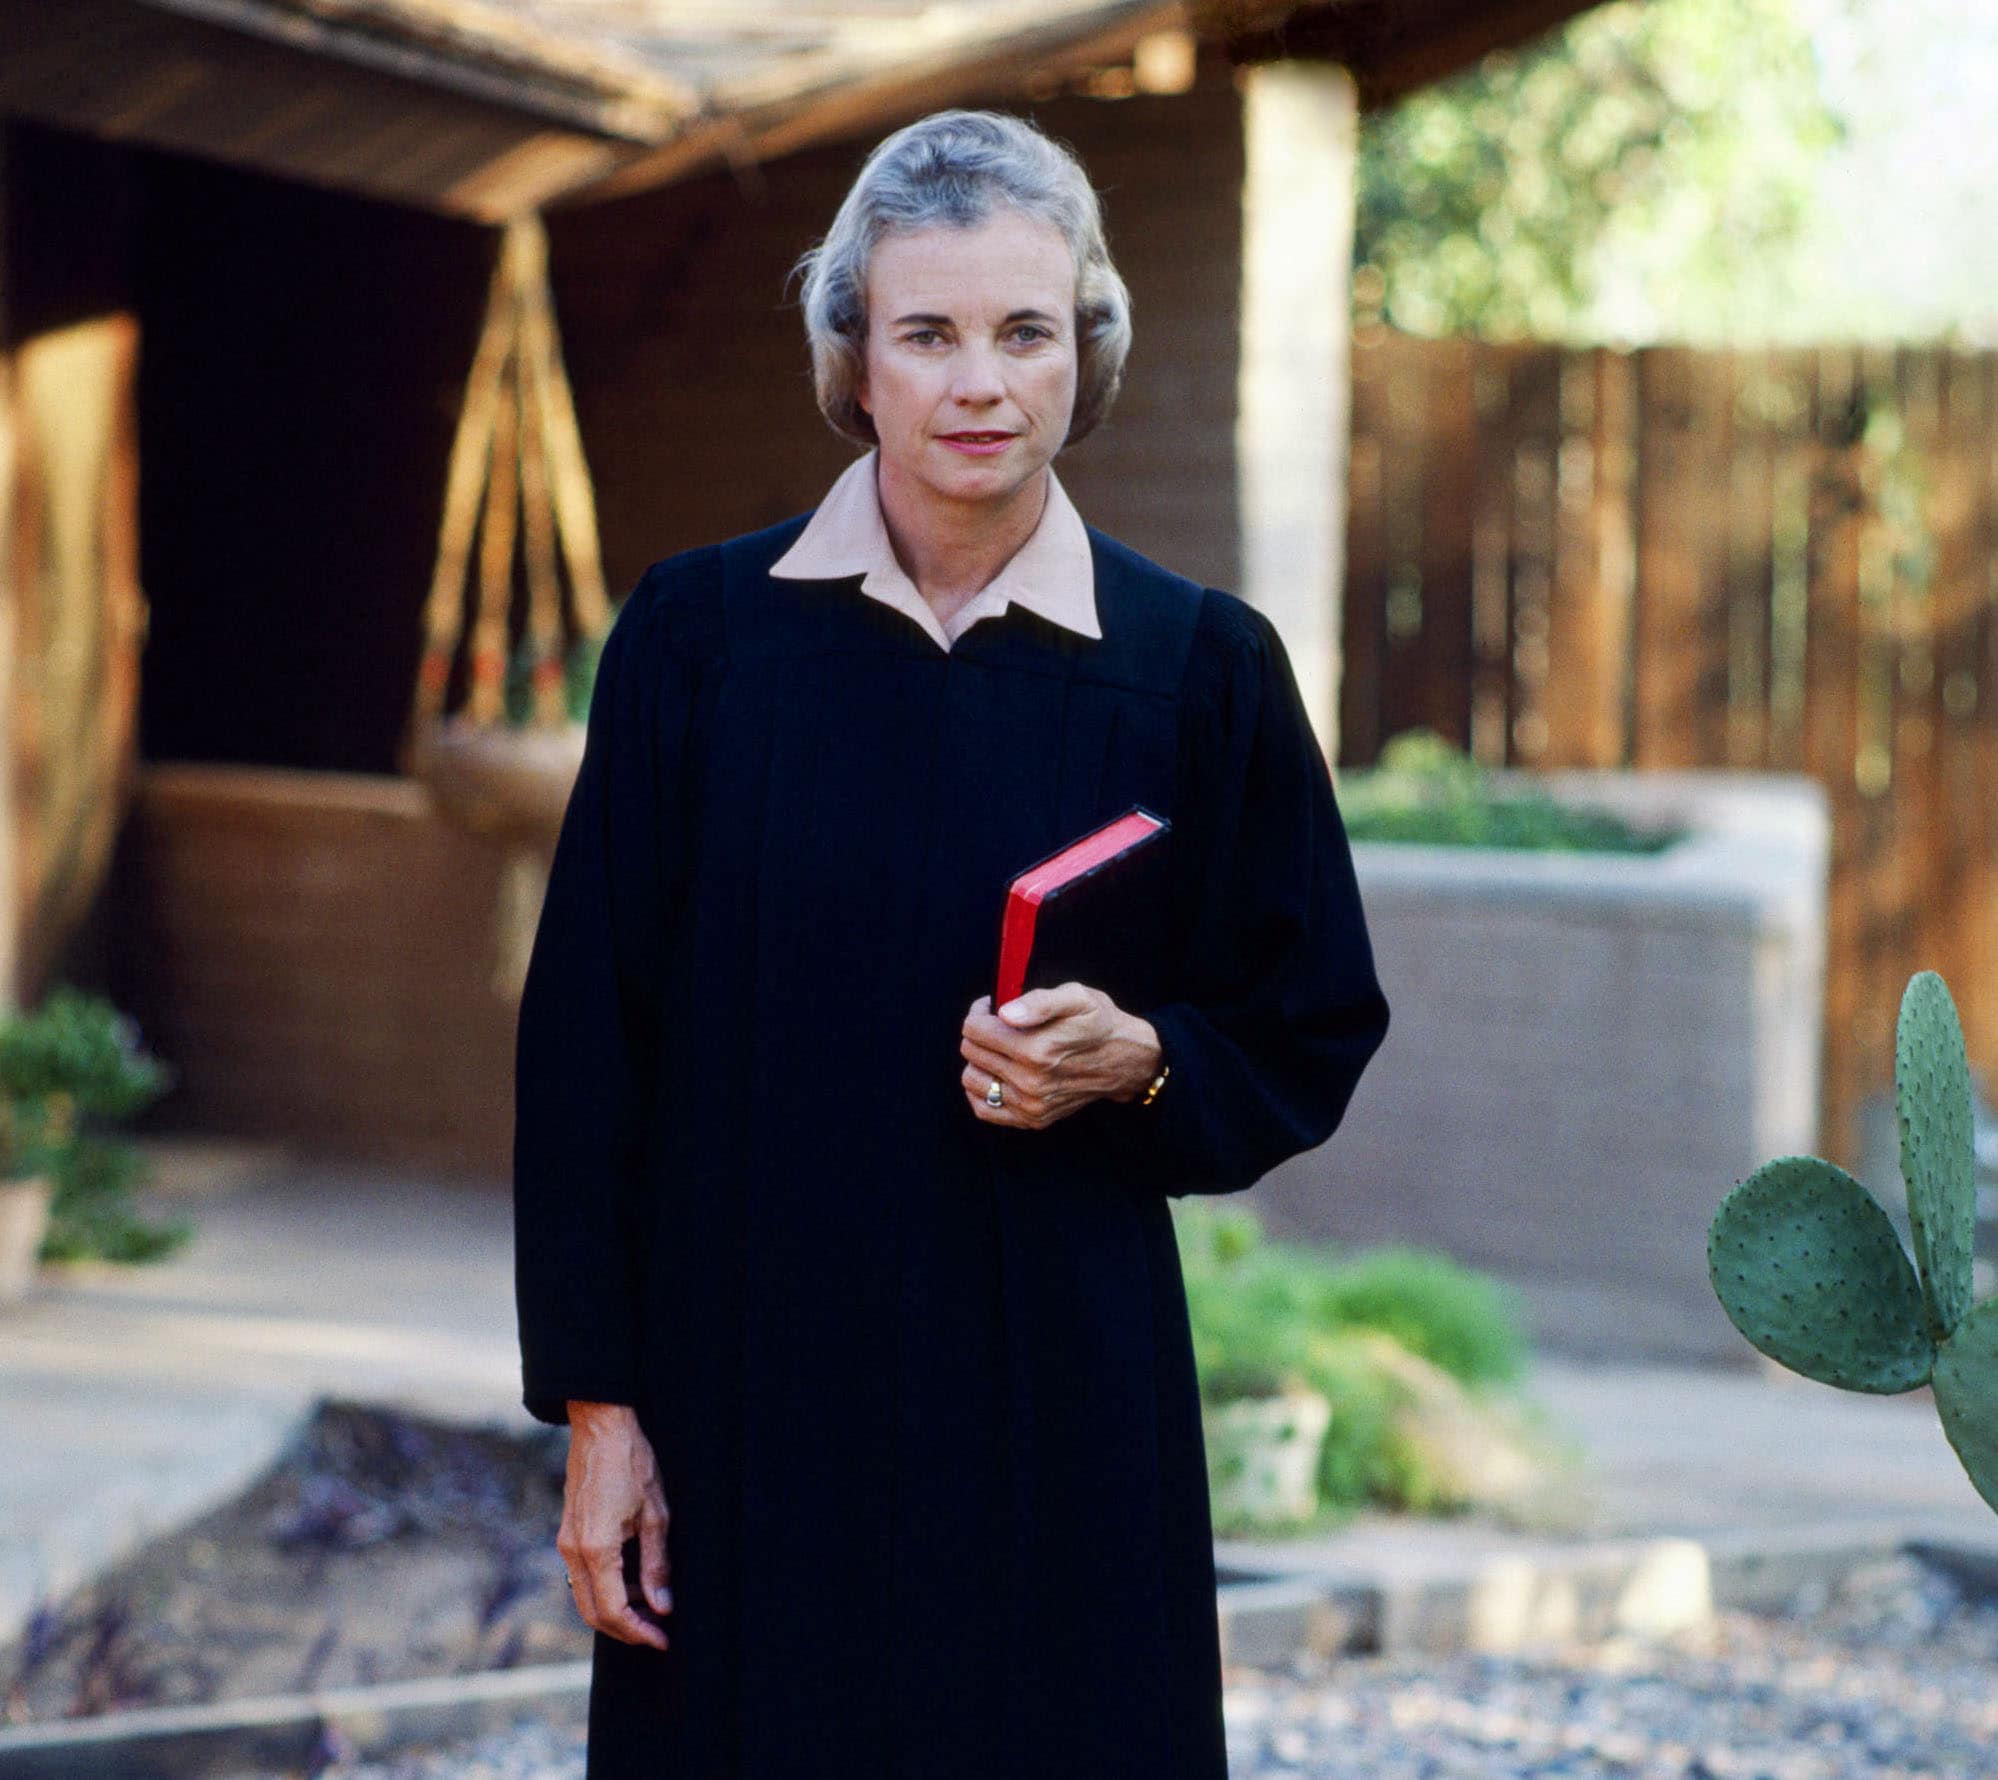 Judge O’Connor outside her home in Scottsdale, AZ